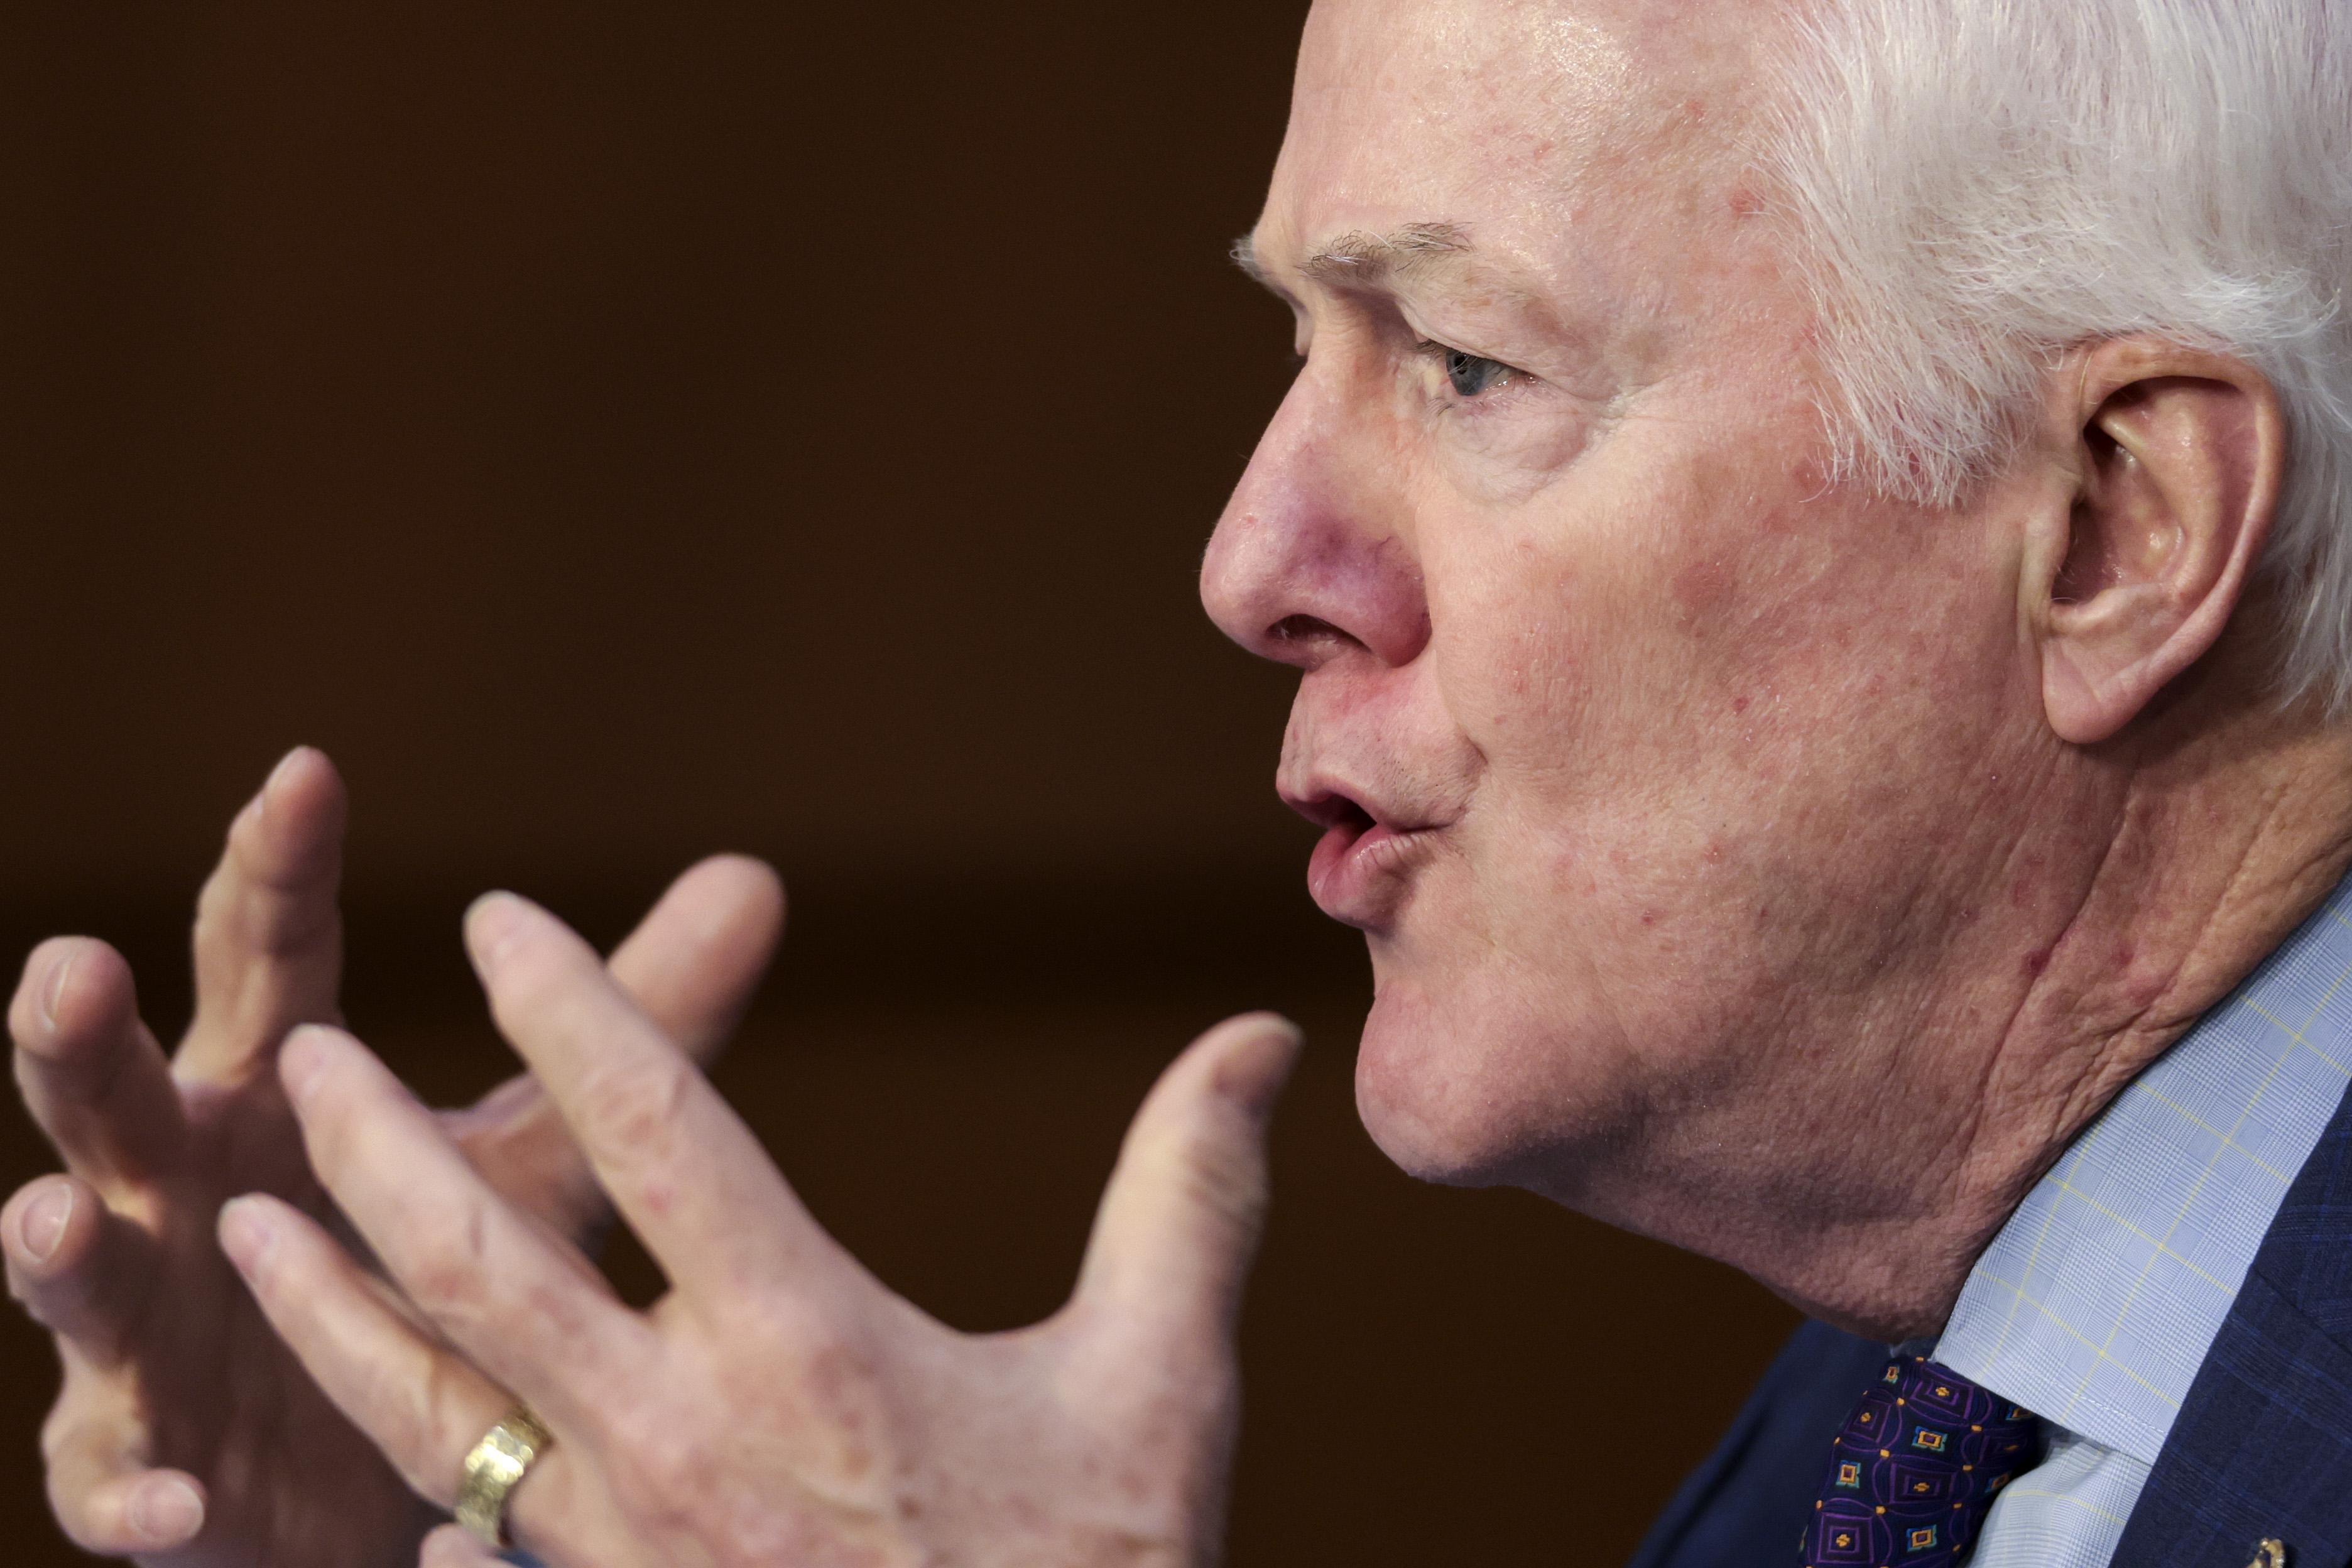 Cornyn holding up his hands and looking exasperated.